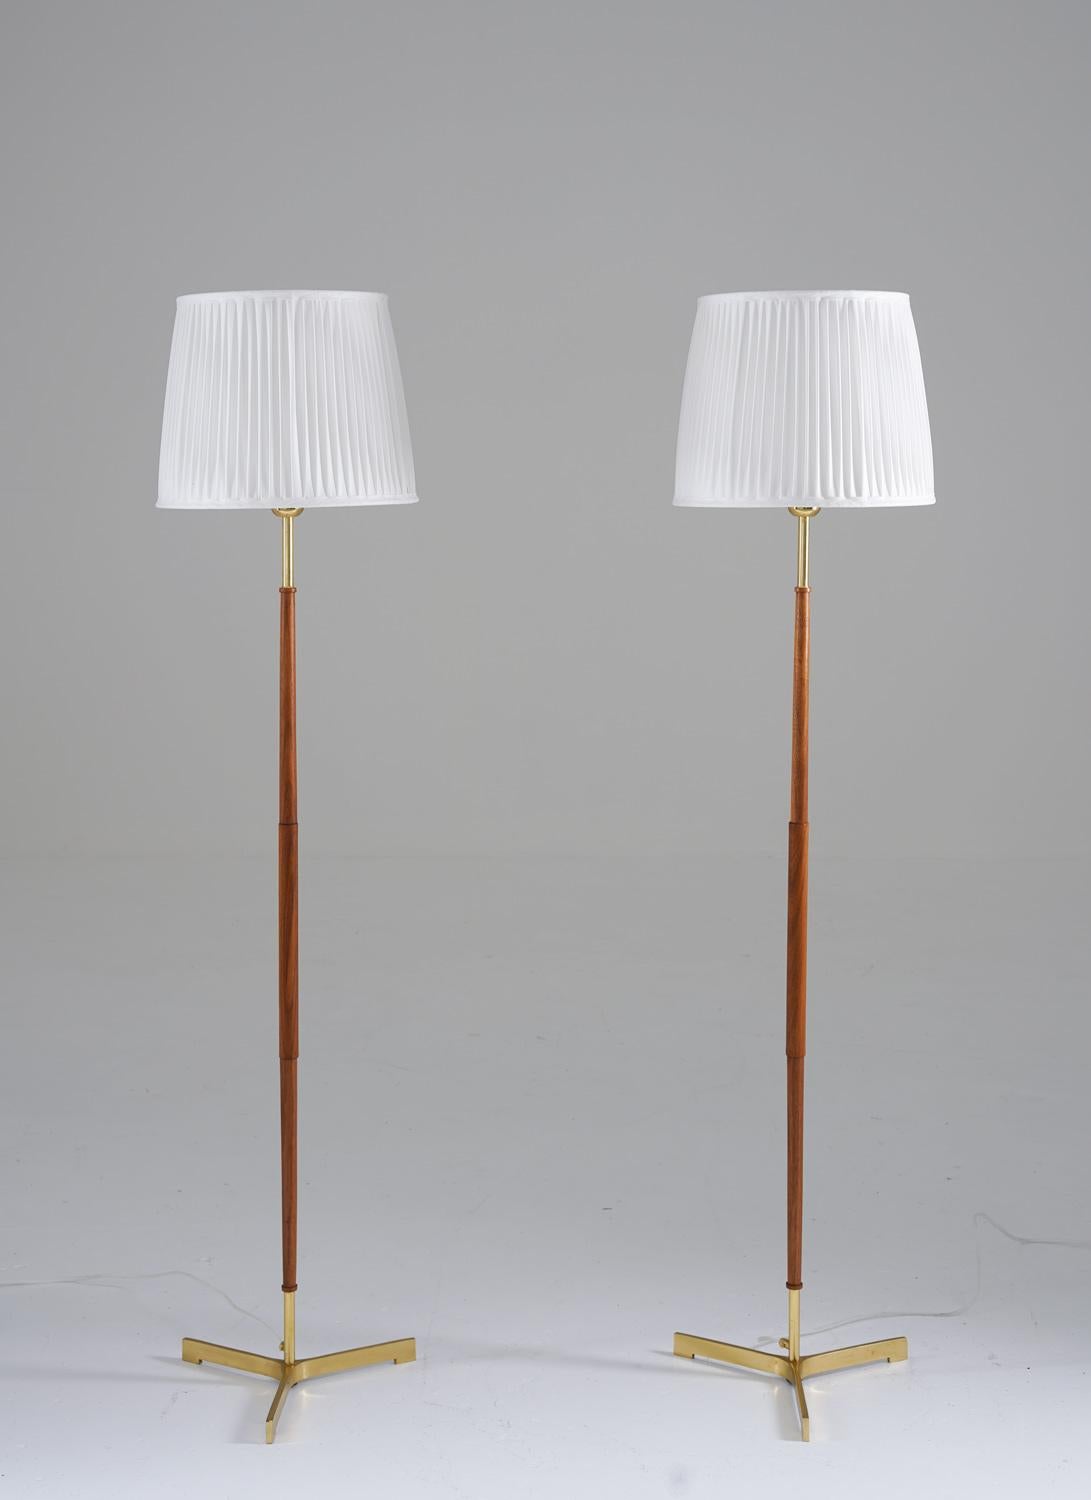 Scandinavian midcentury tripod floor lamps in brass and wood, manufactured in Sweden, 1960s.
These lamps consist of a wood and brass base, resting on a tripod foot in solid brass. They come with new hand-pleated shades. 

Condition: Very good